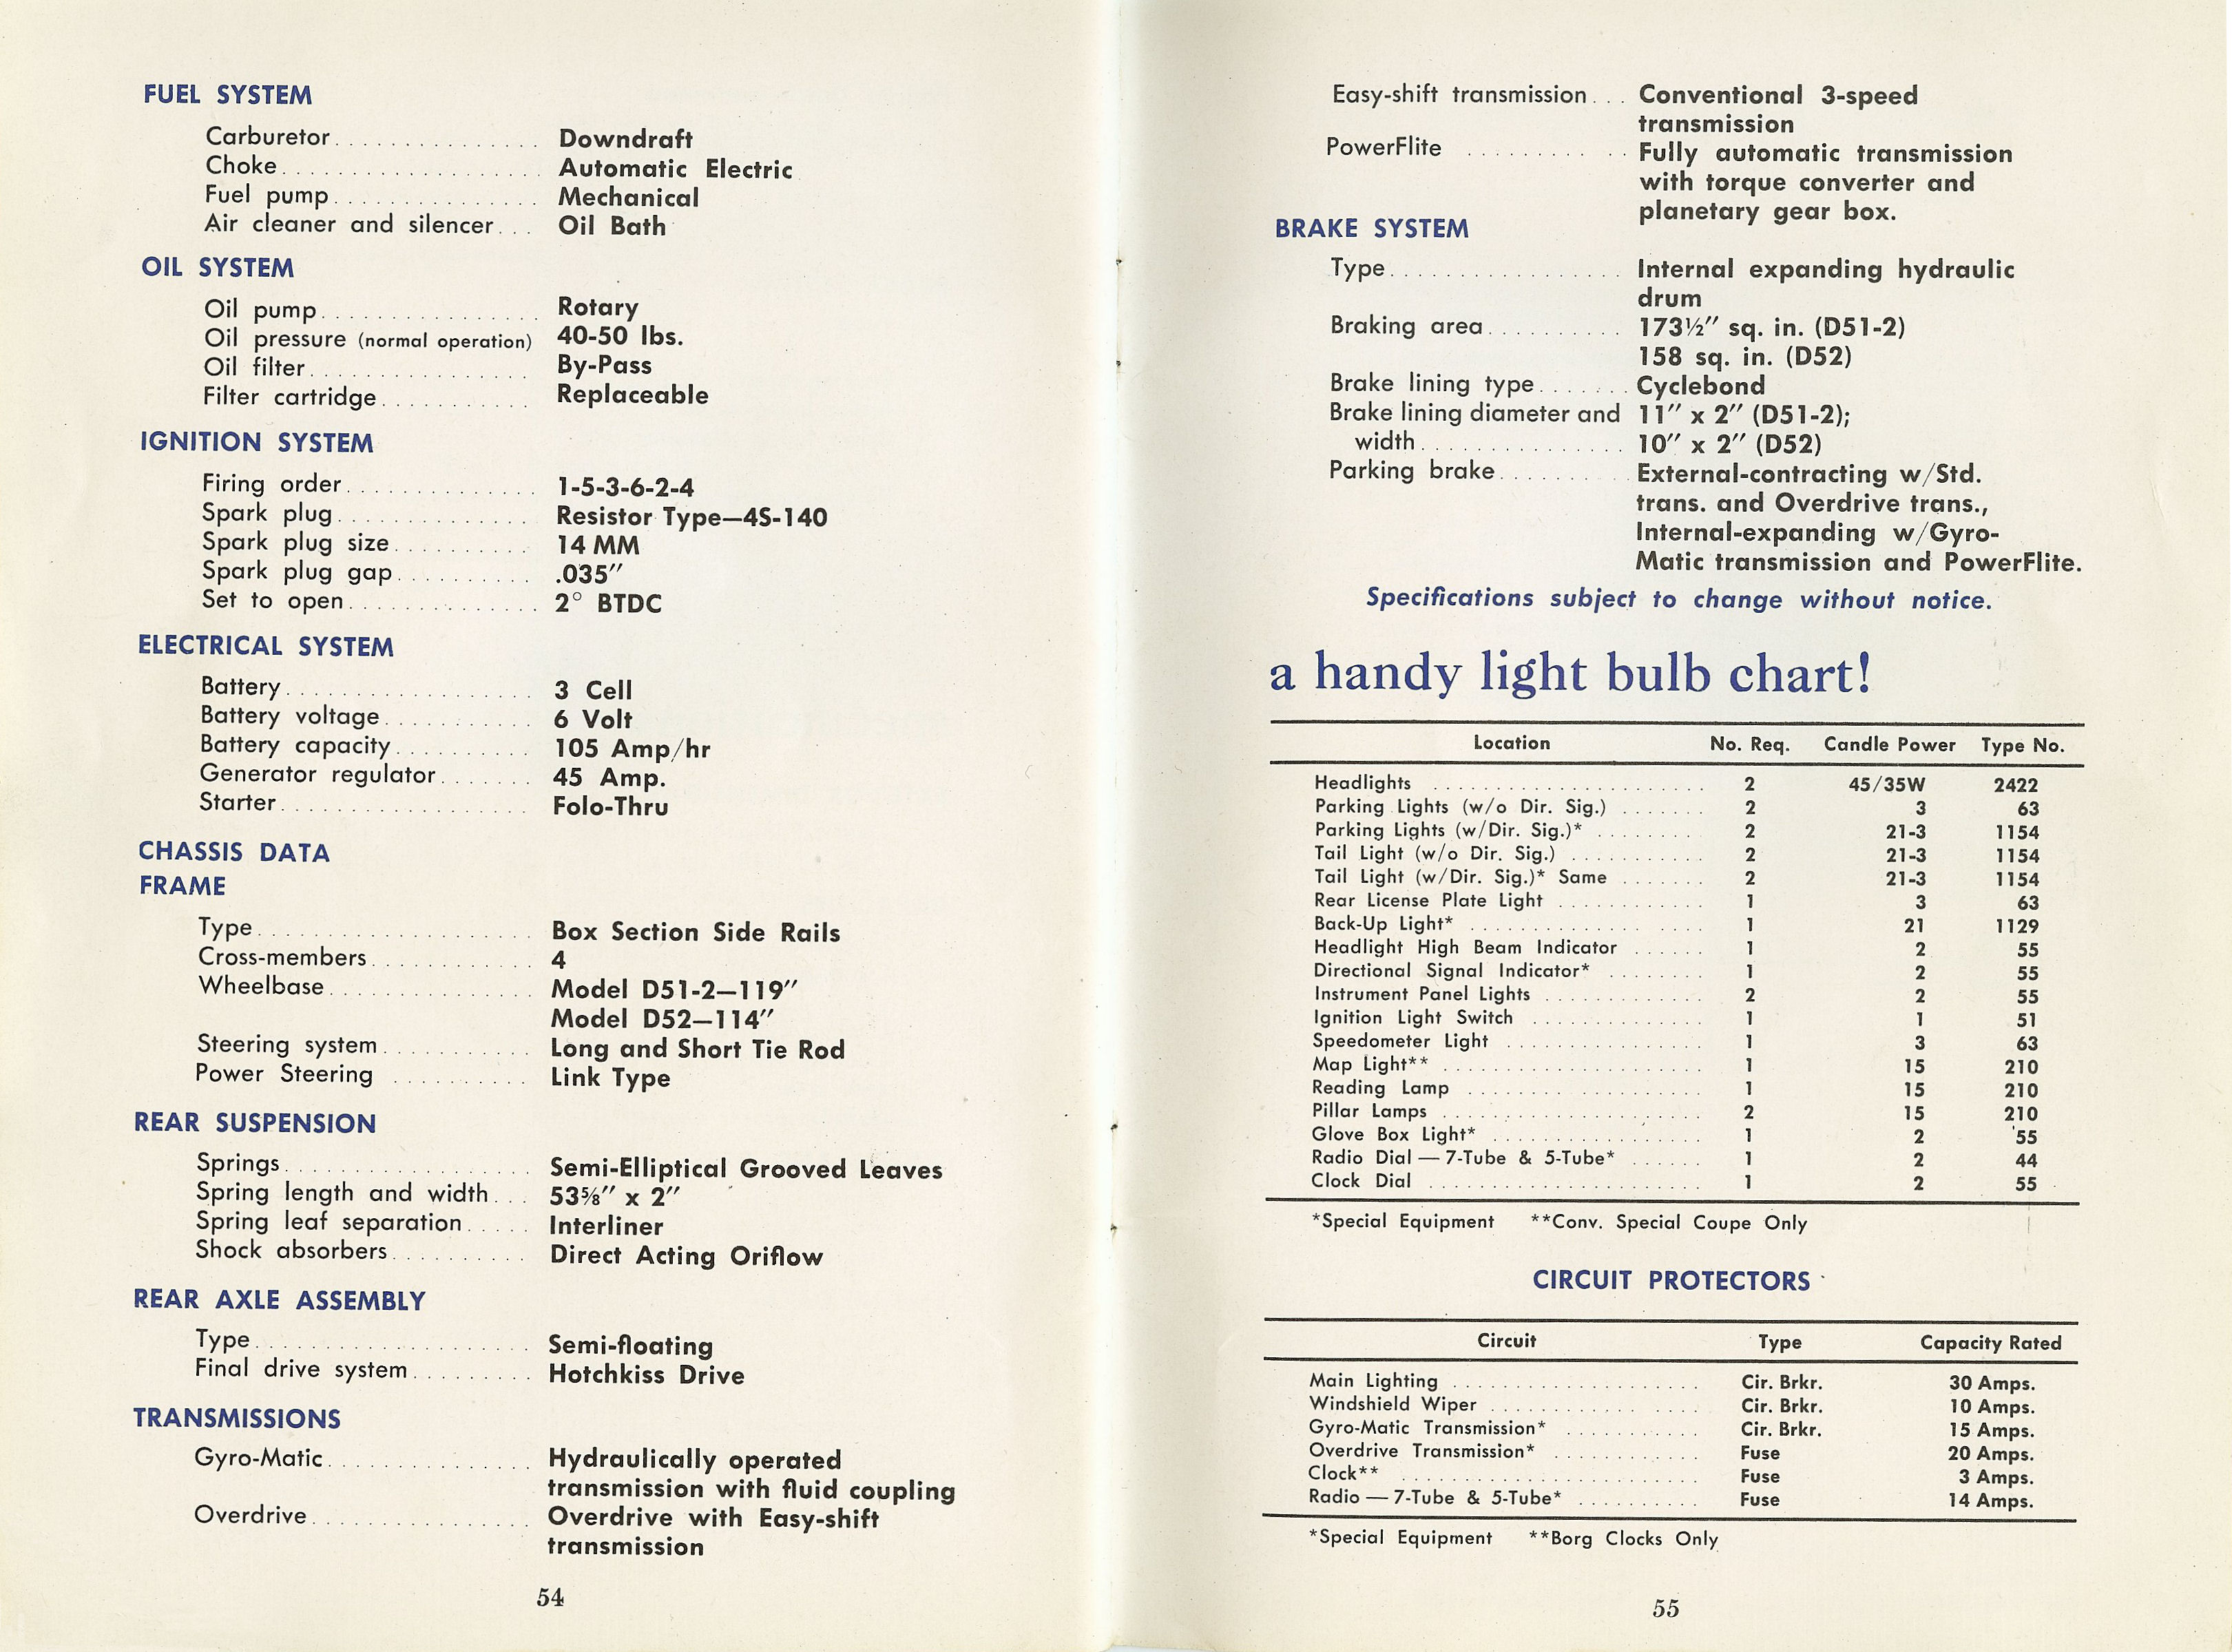 1954 Dodge Owners Manual-54-55